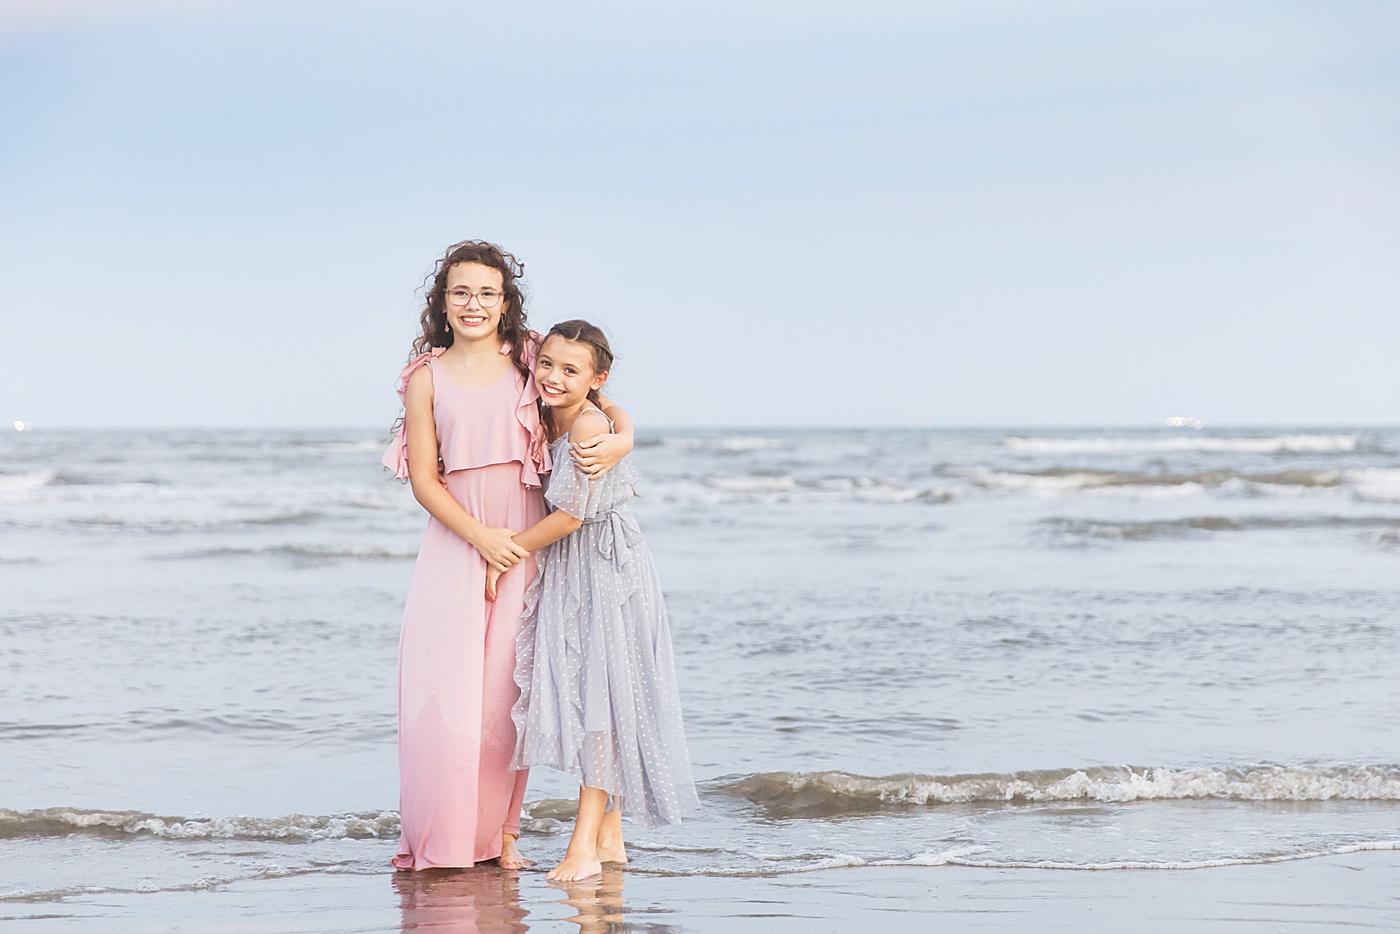 Sisters on the beach. Photo by Fresh Light Photography.